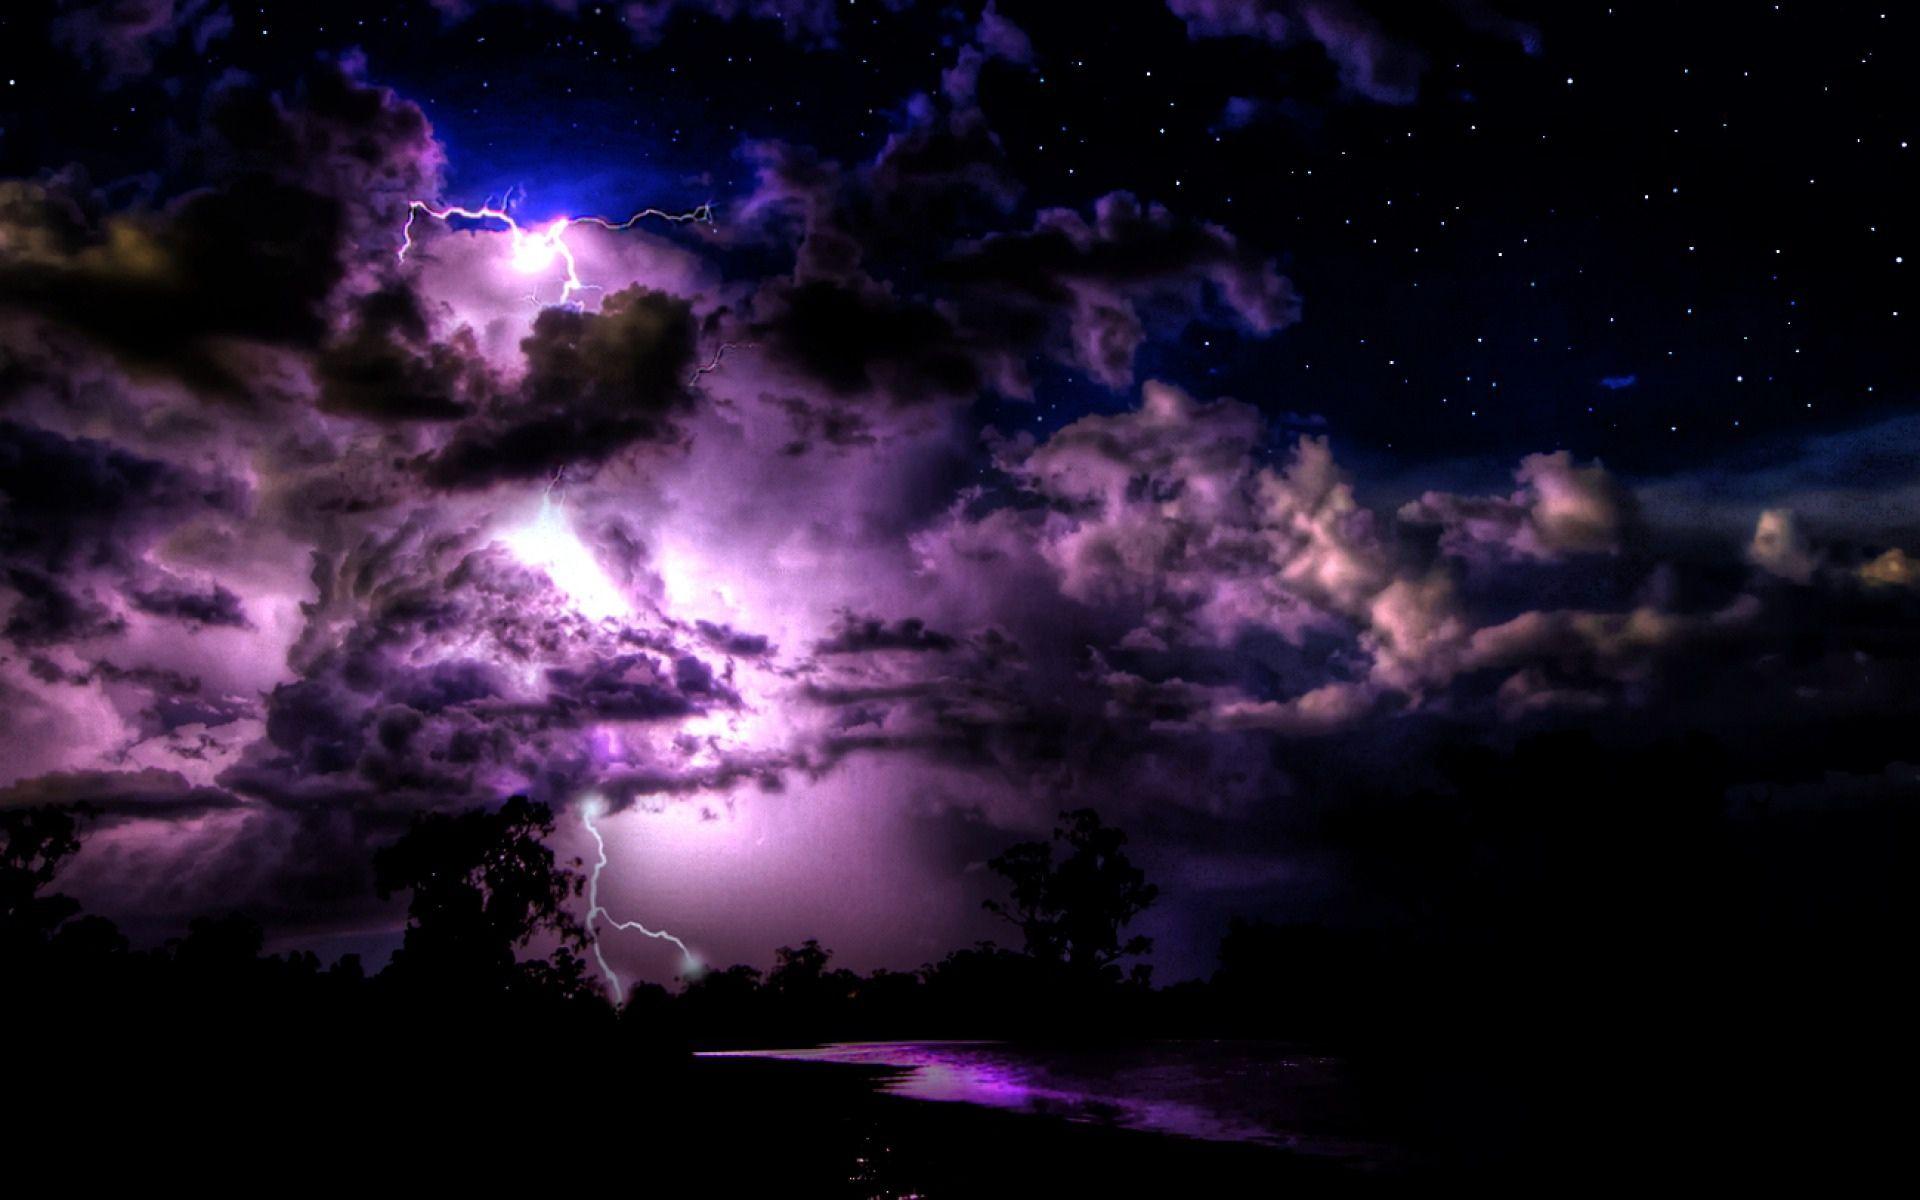 Storm Lightning Over Lake Night Sky View iPhone X Wallpapers Free Download